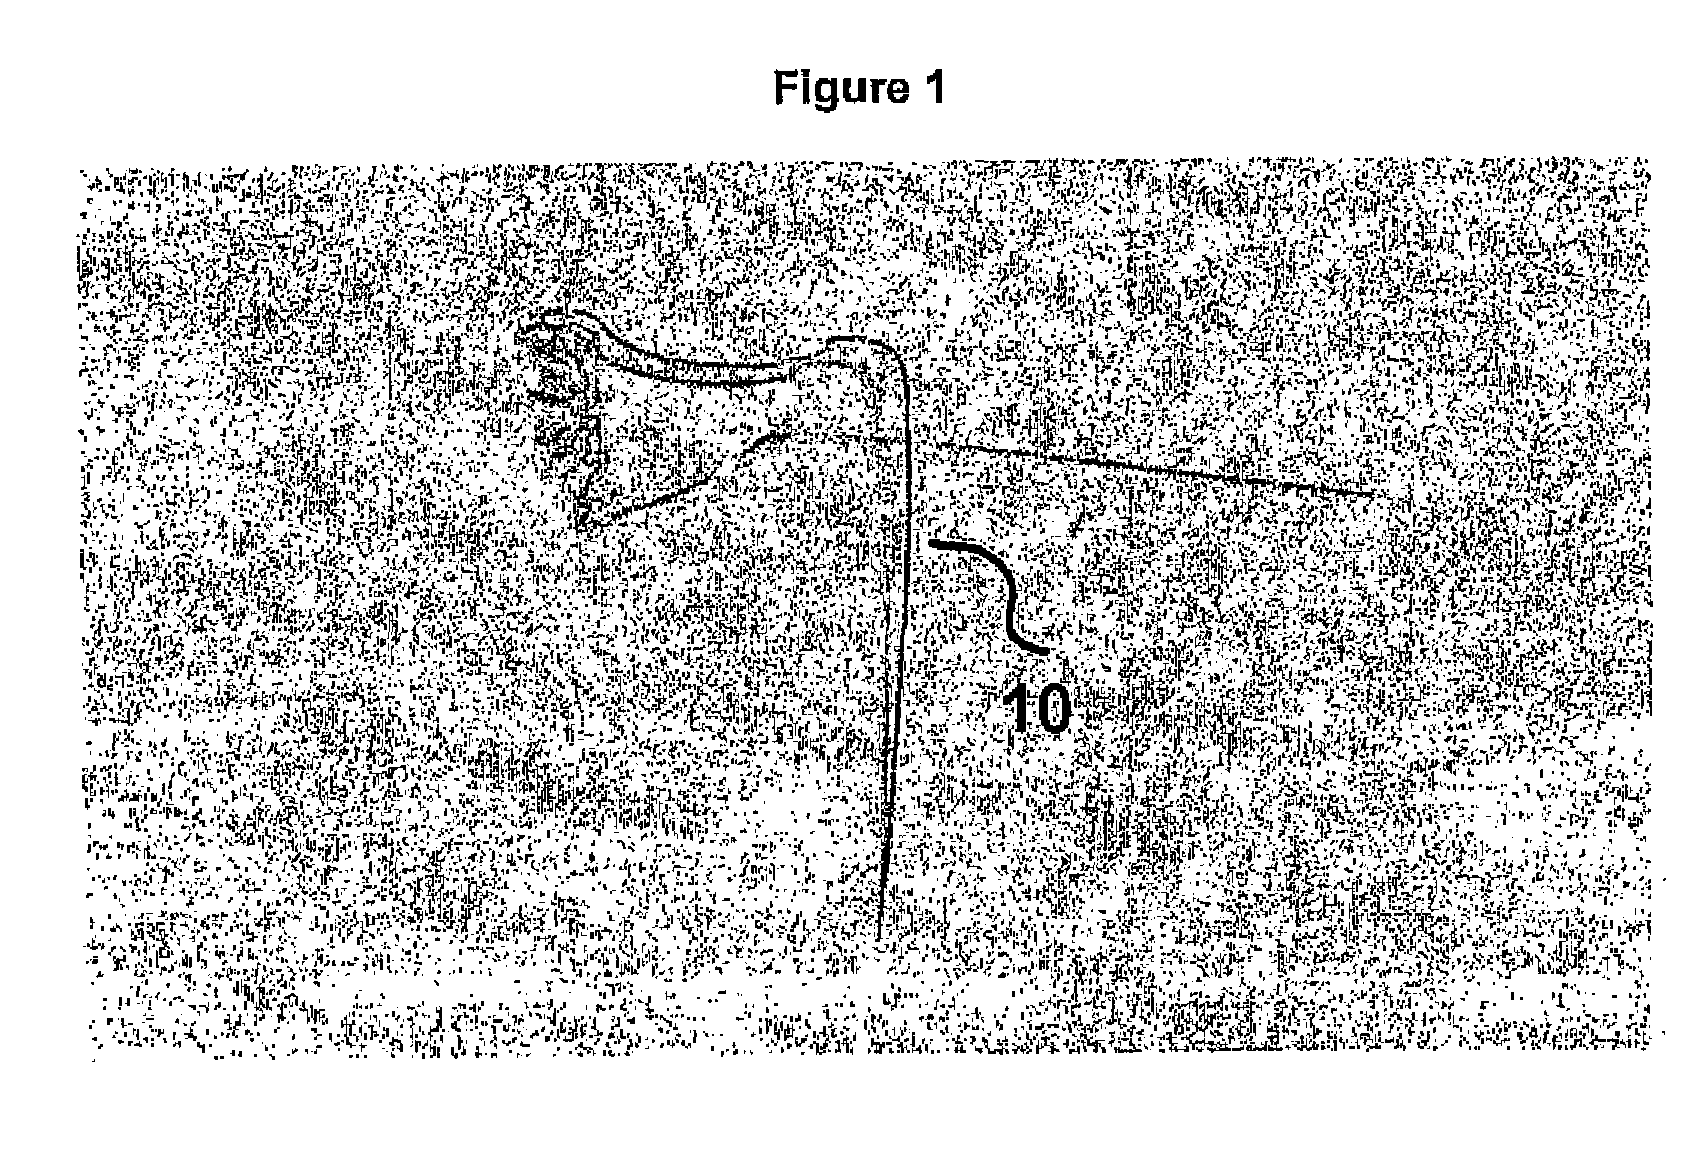 Method and device for the controlled delivery and placement of securing elements in a body